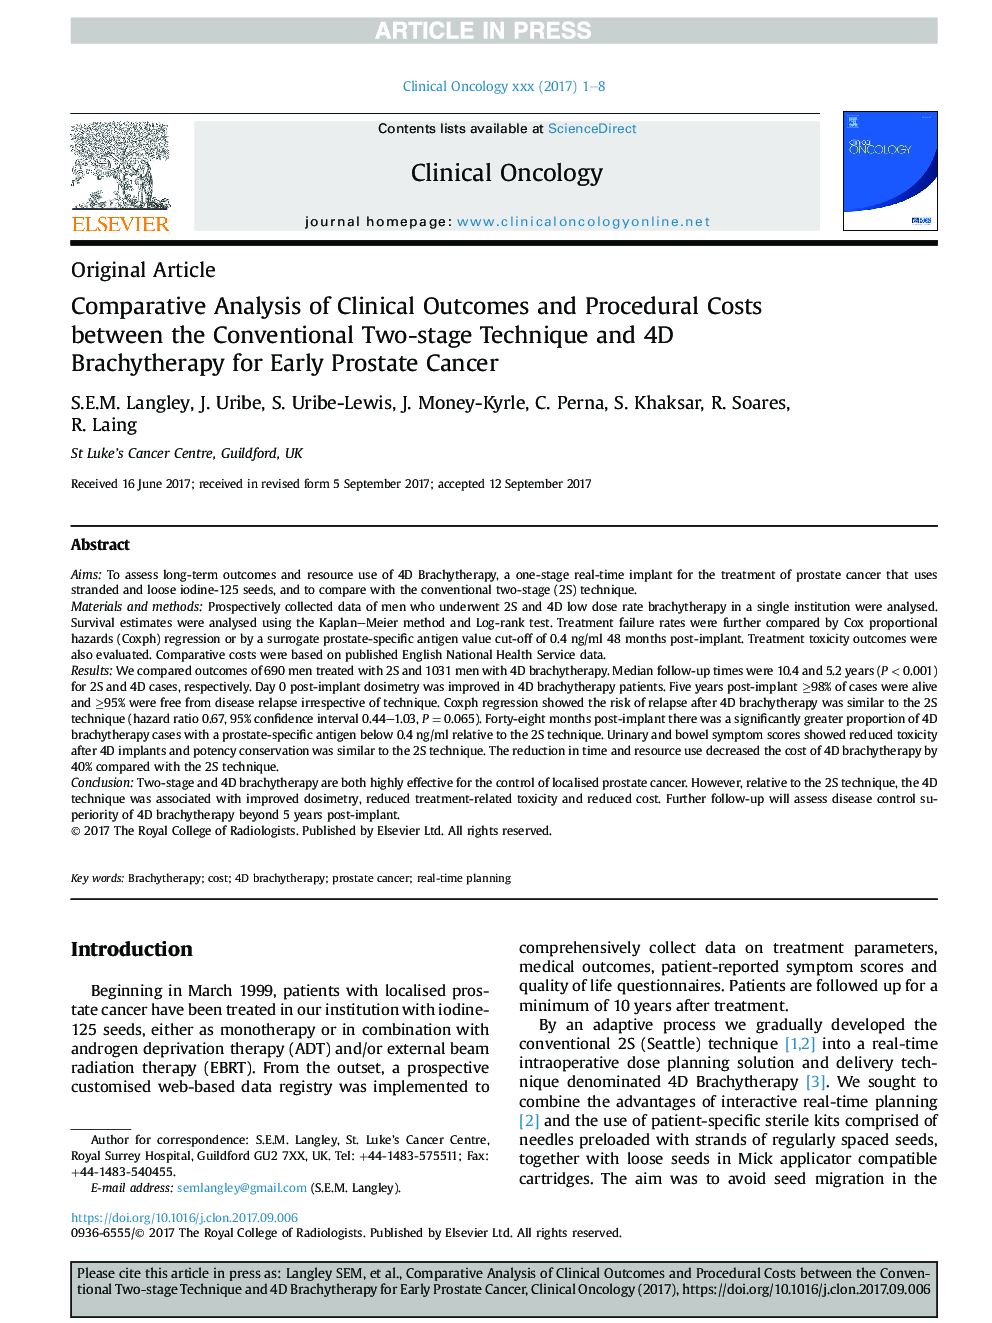 Comparative Analysis of Clinical Outcomes and Procedural Costs between the Conventional Two-stage Technique and 4D Brachytherapy for Early Prostate Cancer